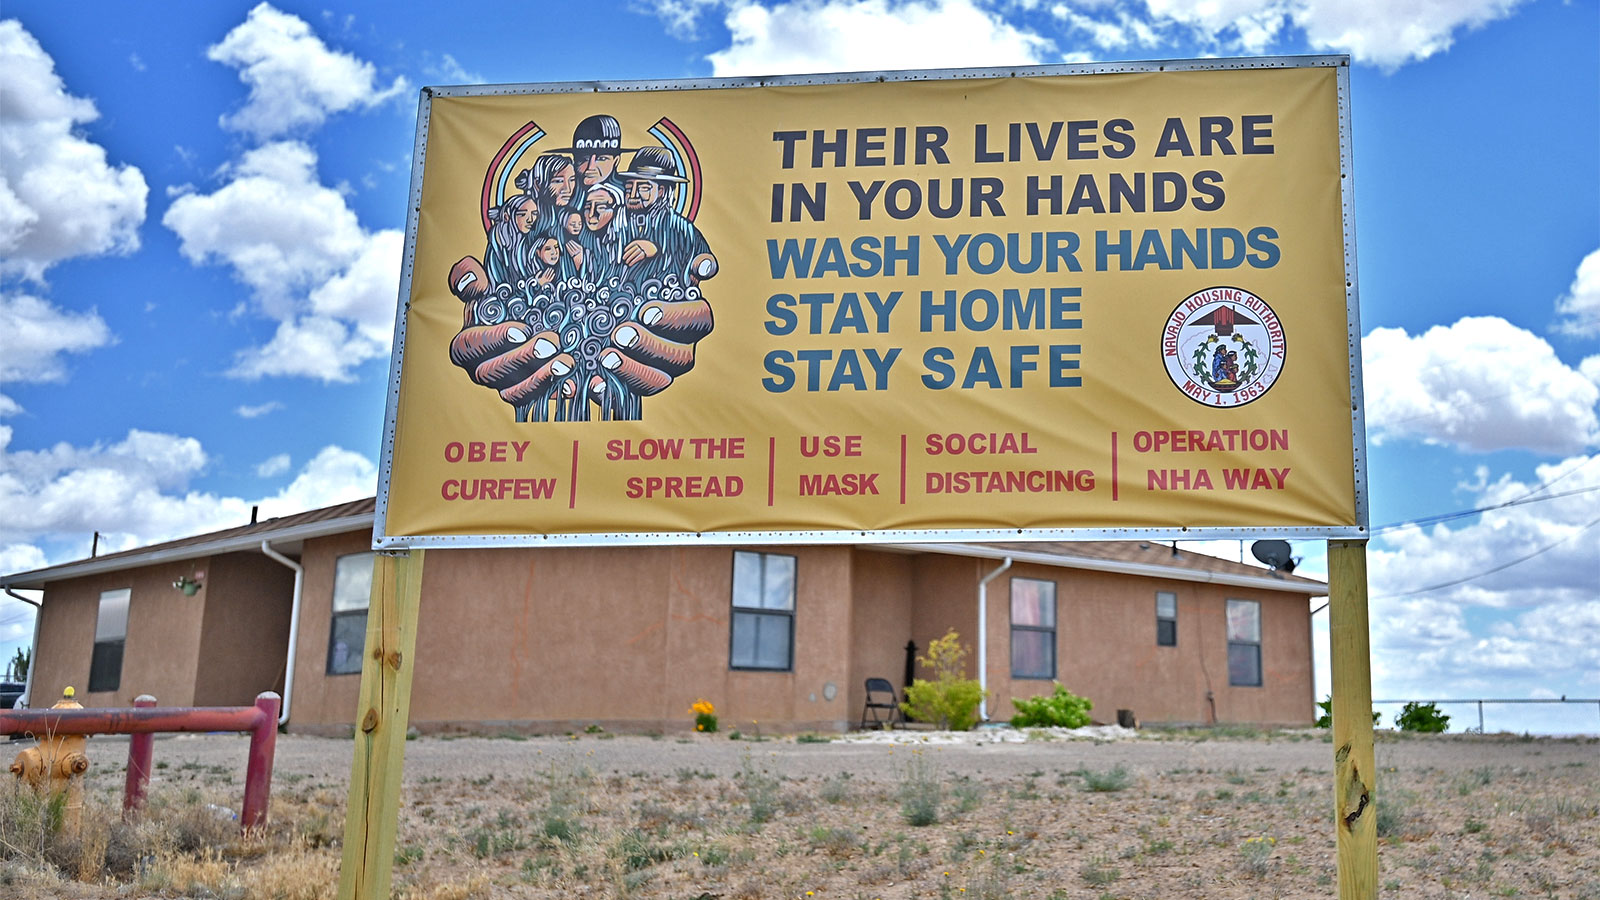 what is navajo life like today and where is the navajo indian reservation located